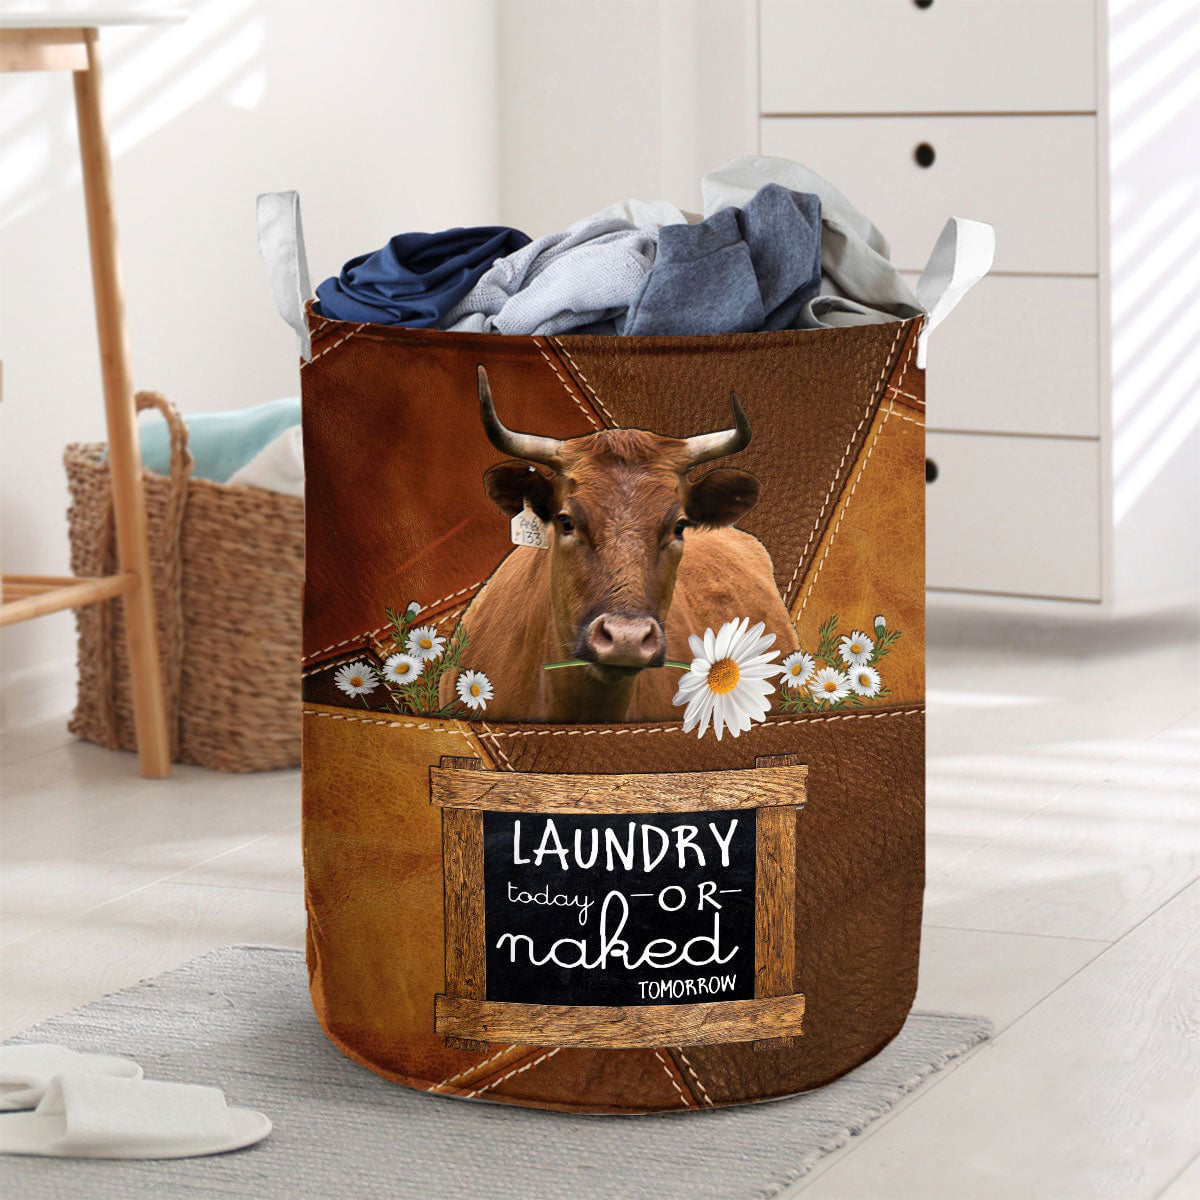 Corriente-laundry today or naked tomorrow laundry basket